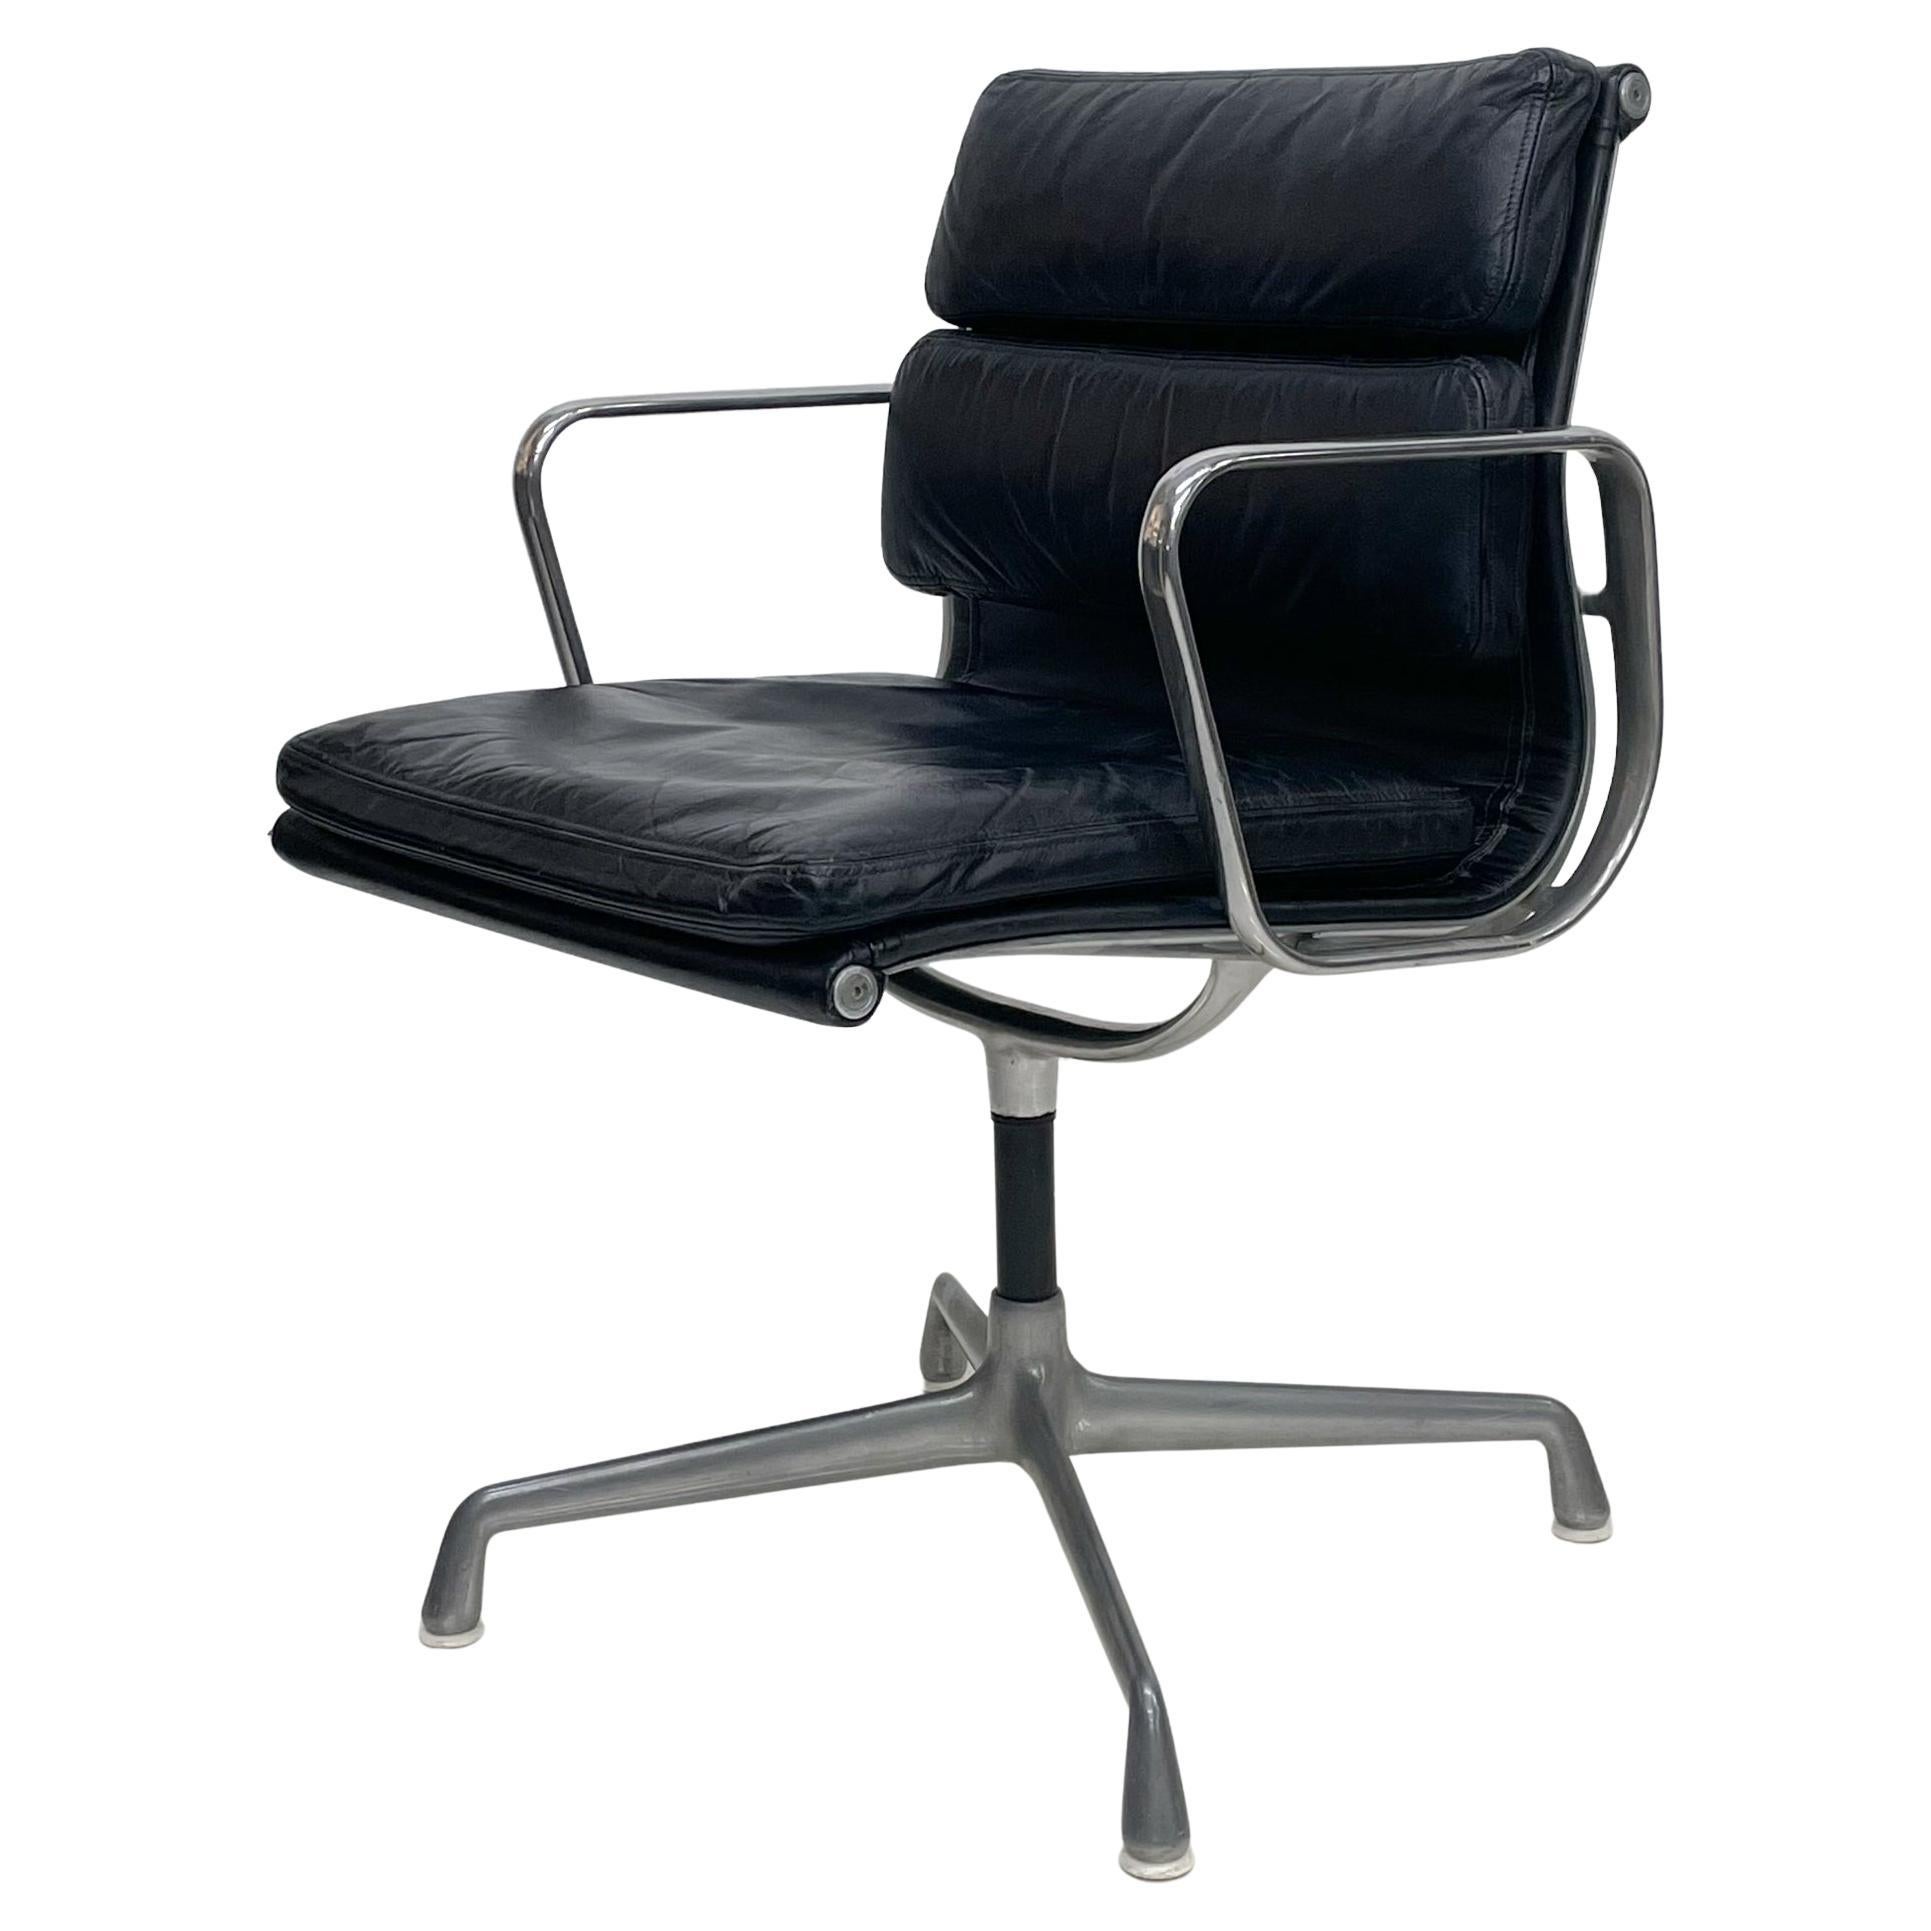 Eames soft pad
Original Herman Miller Eames soft pad management side office chair black leather.
Eames classic soft pad chair by Charles and Ray Eames designed 1969
Called soft pad for the aluminum group. 
Superior comfort in a collectible